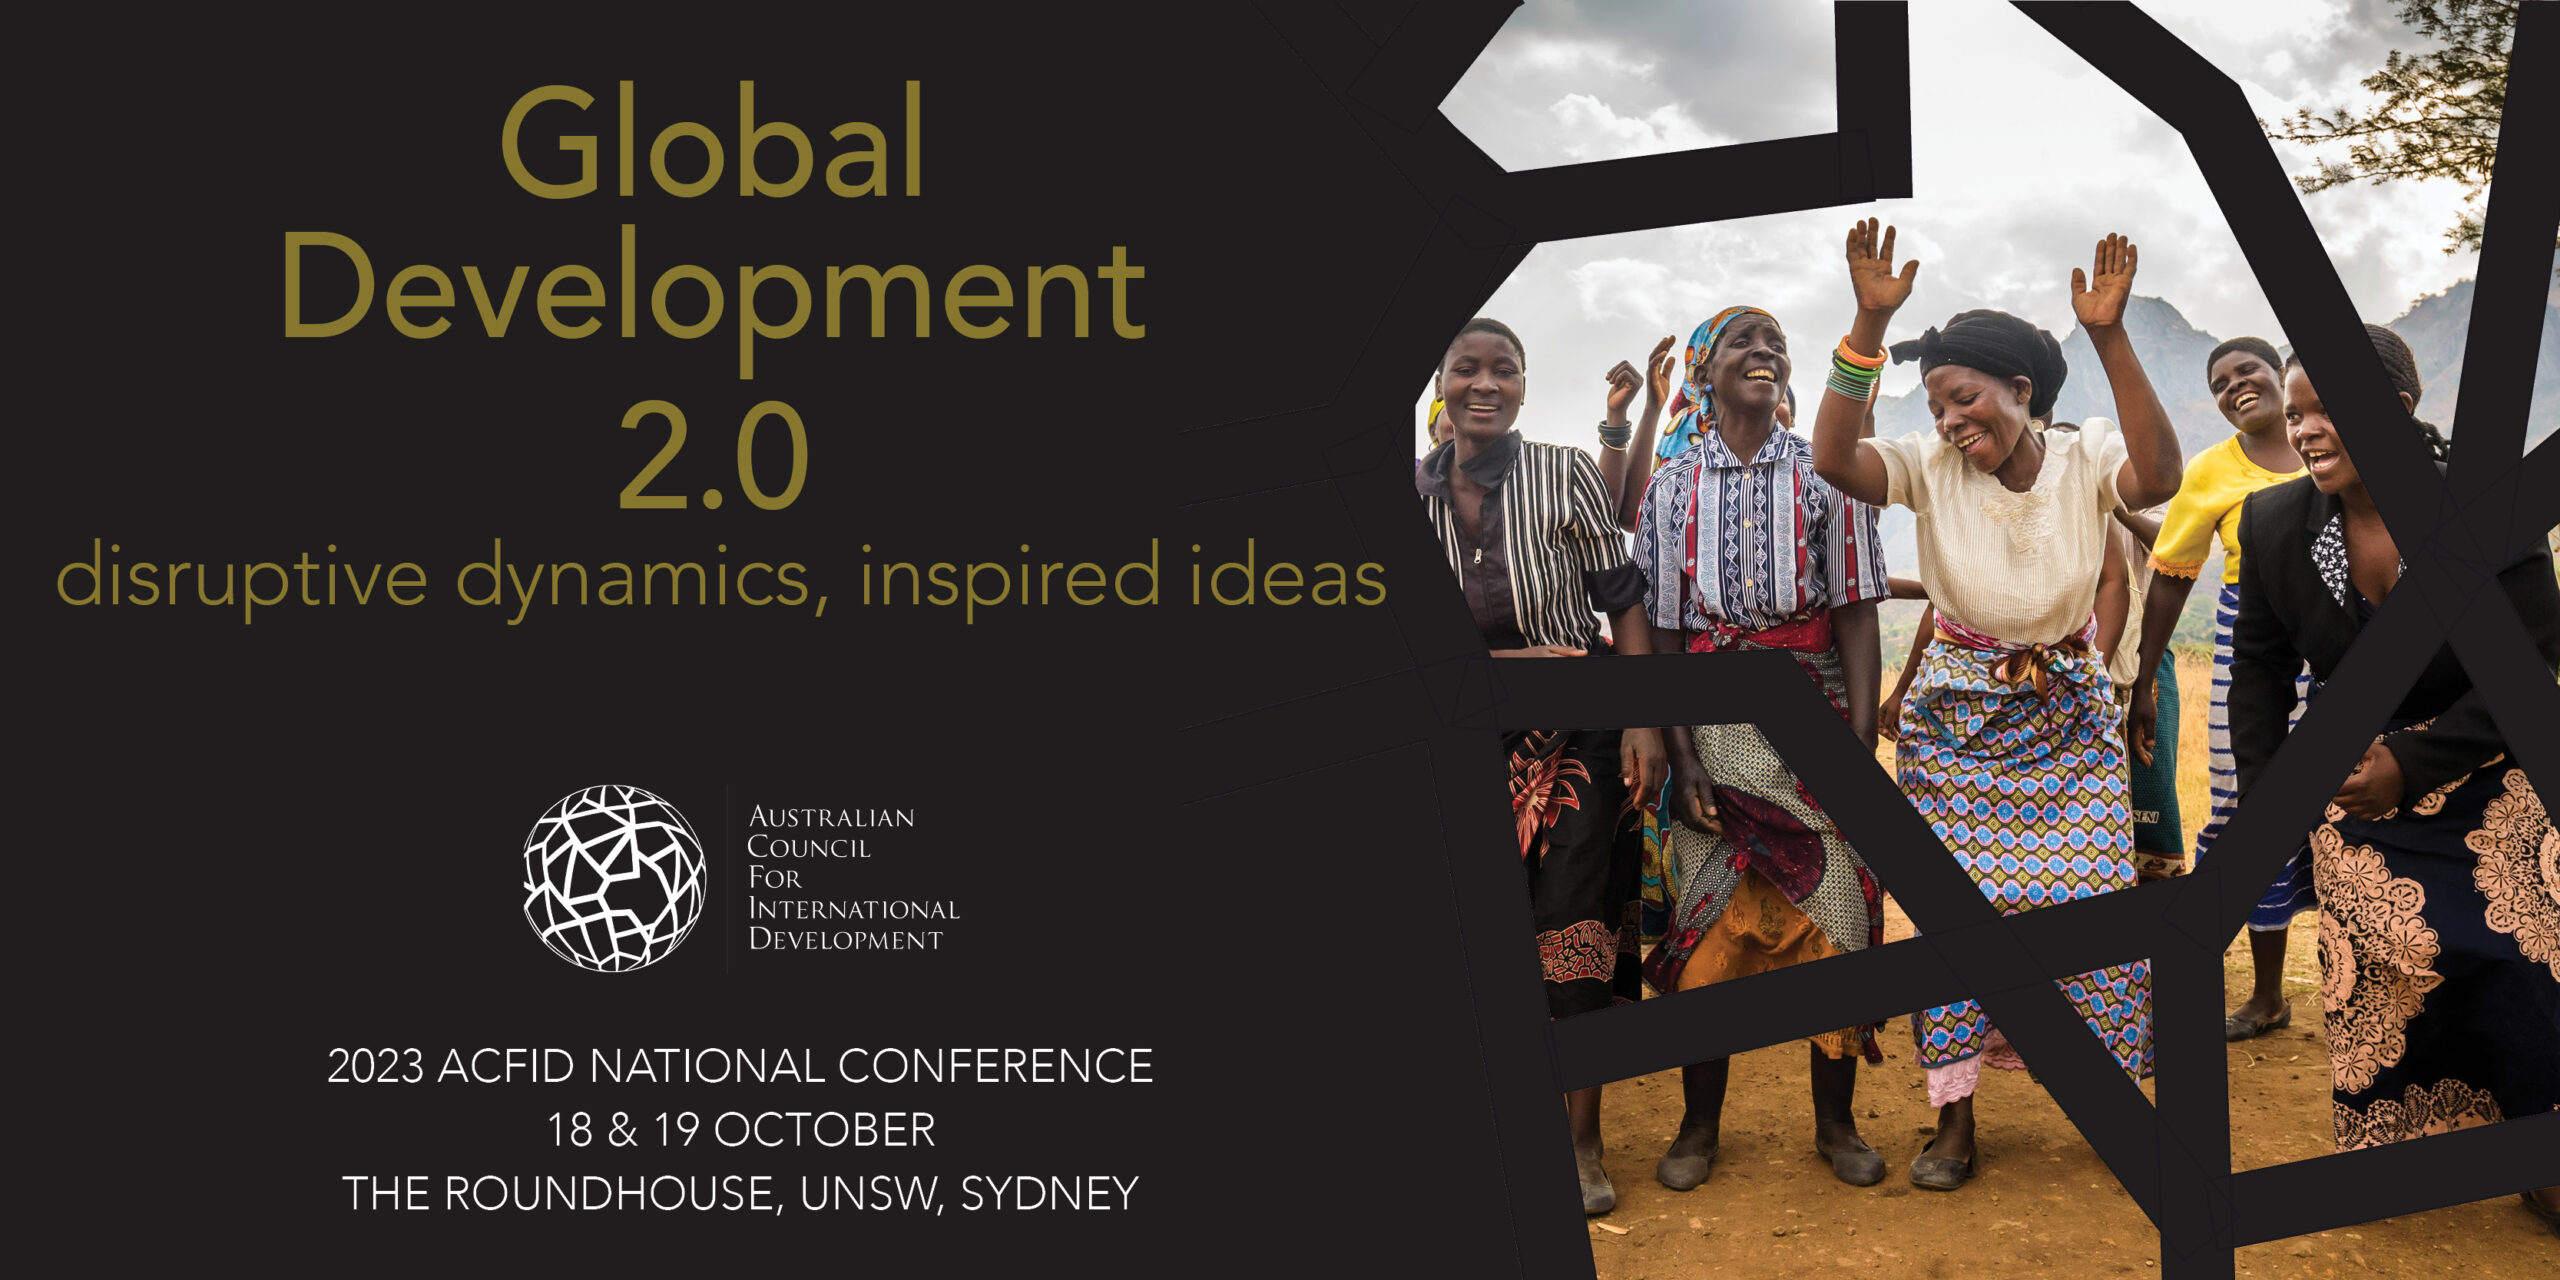 Global Development 2.0: disruptive dynamics, inspired ideas ACFID National Conference 2023. Contains a picture from World Vision of women joyously dancing inside ACFID's webbing in the shape of Australia